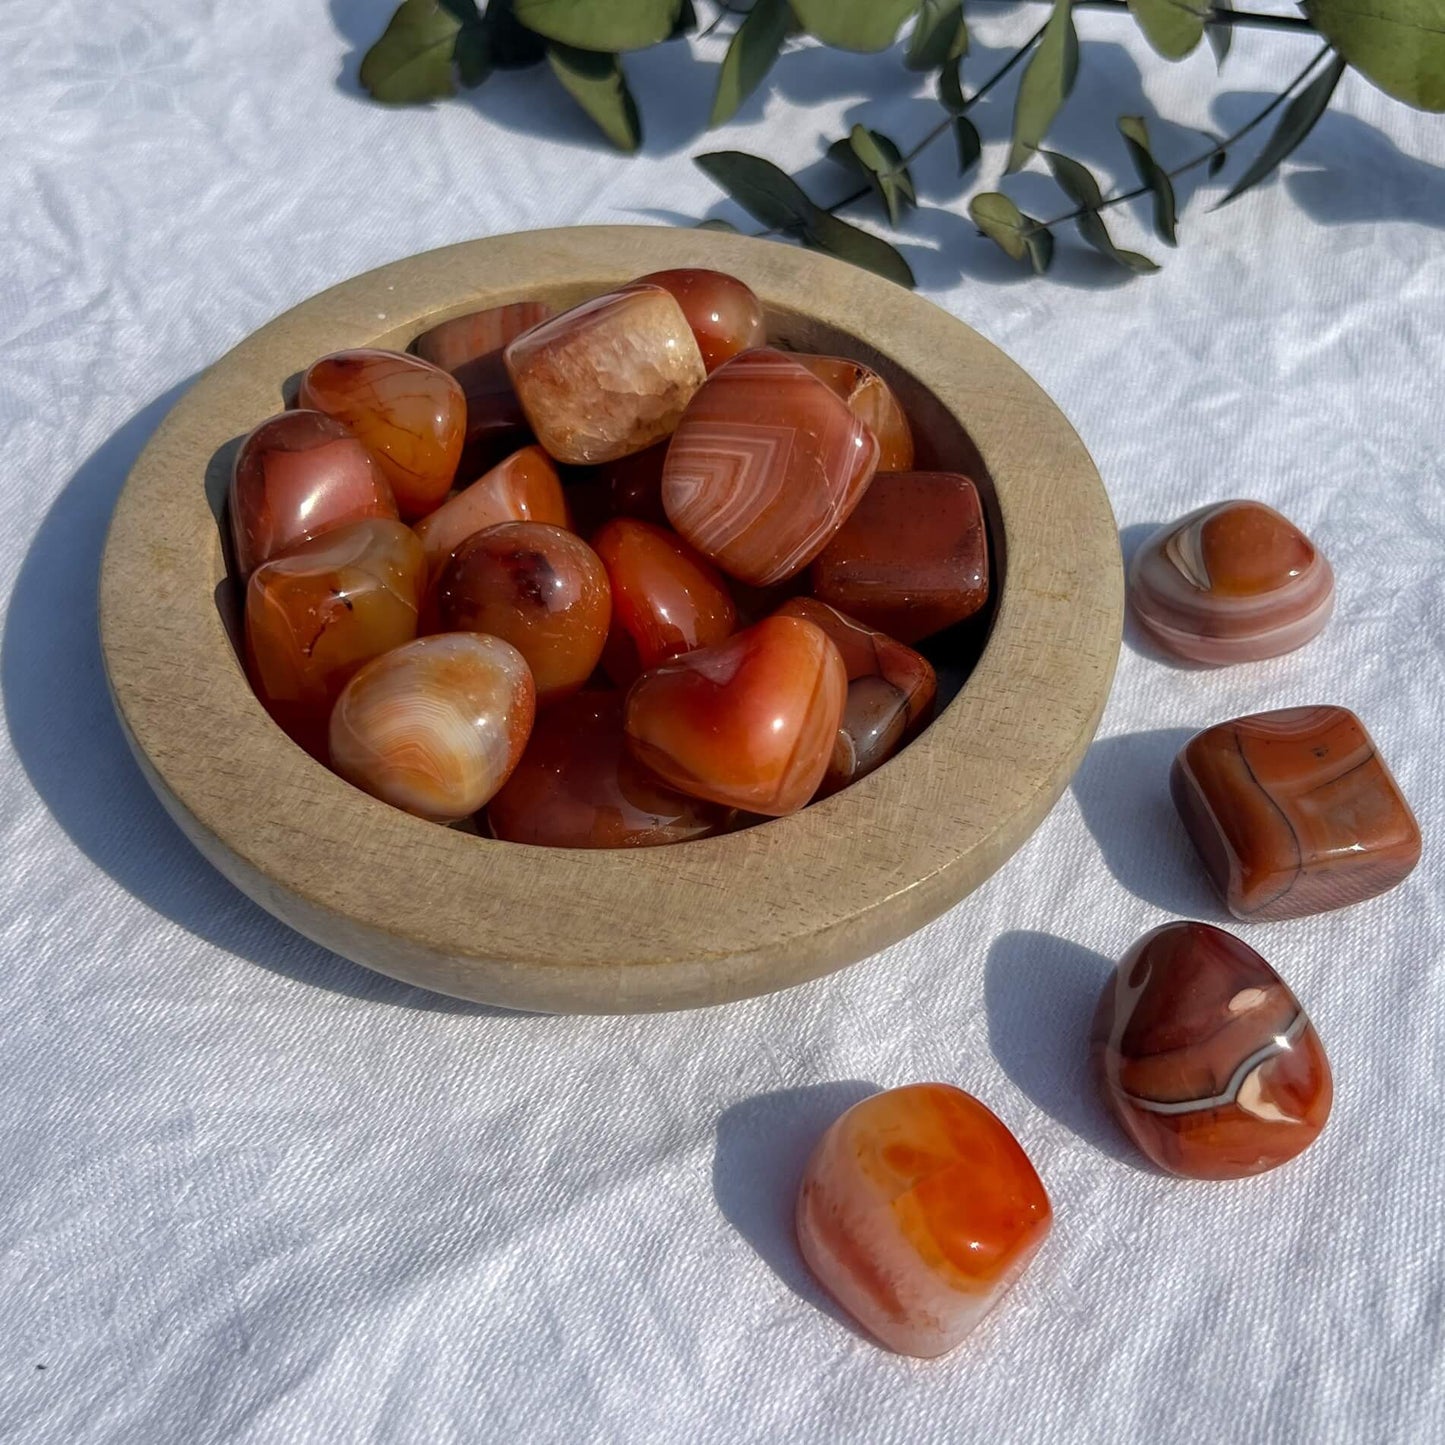 A wooden dish overflowing with large red and orange patterned carnelian crystal pebbles